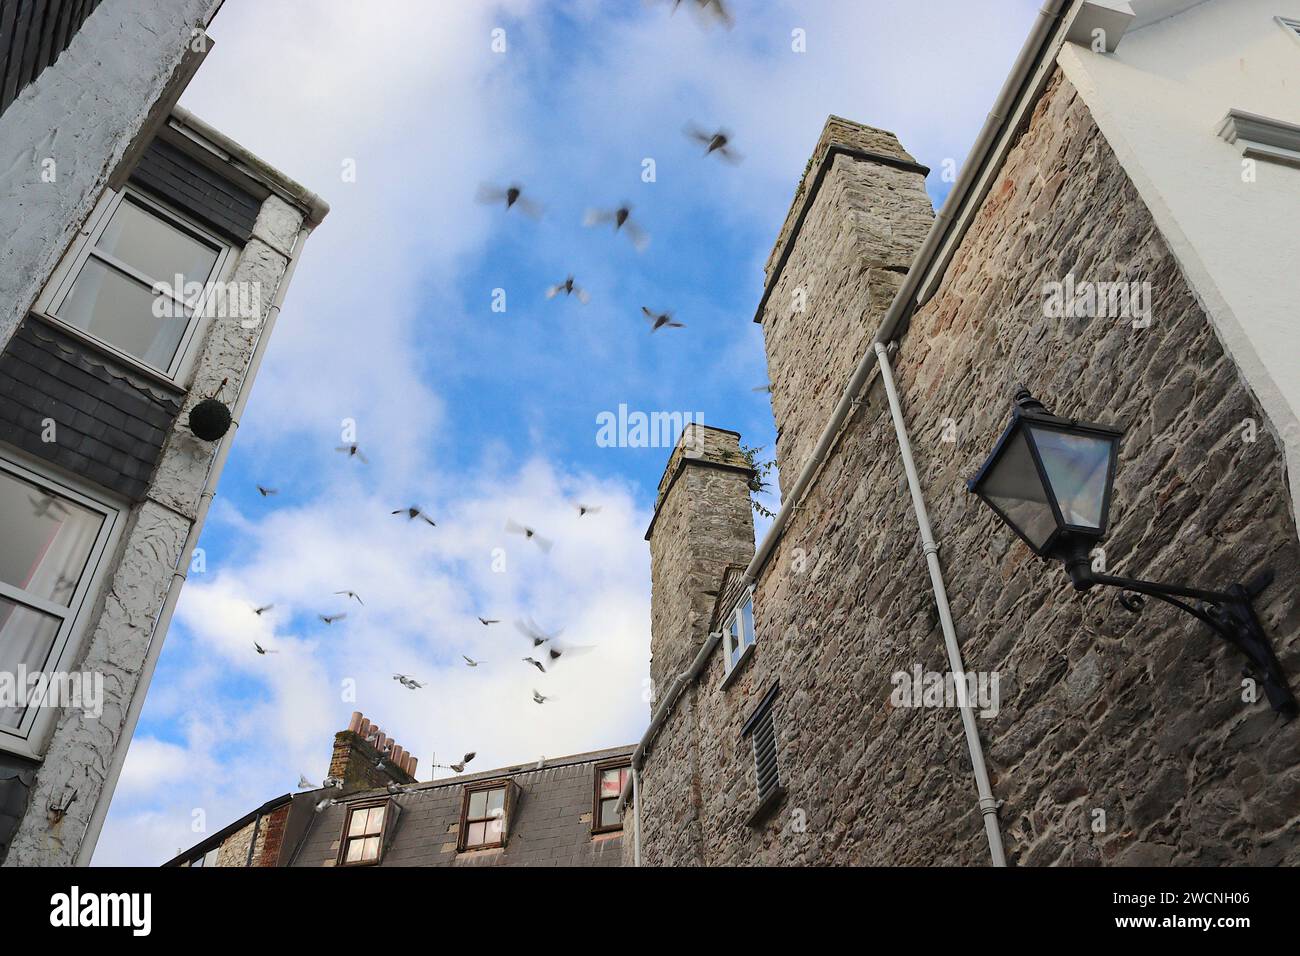 Pigeons and seagulls take flight squabbling for the best positions perched on ridge tiles of historic buildings in New Street, Plymouth. Stock Photo